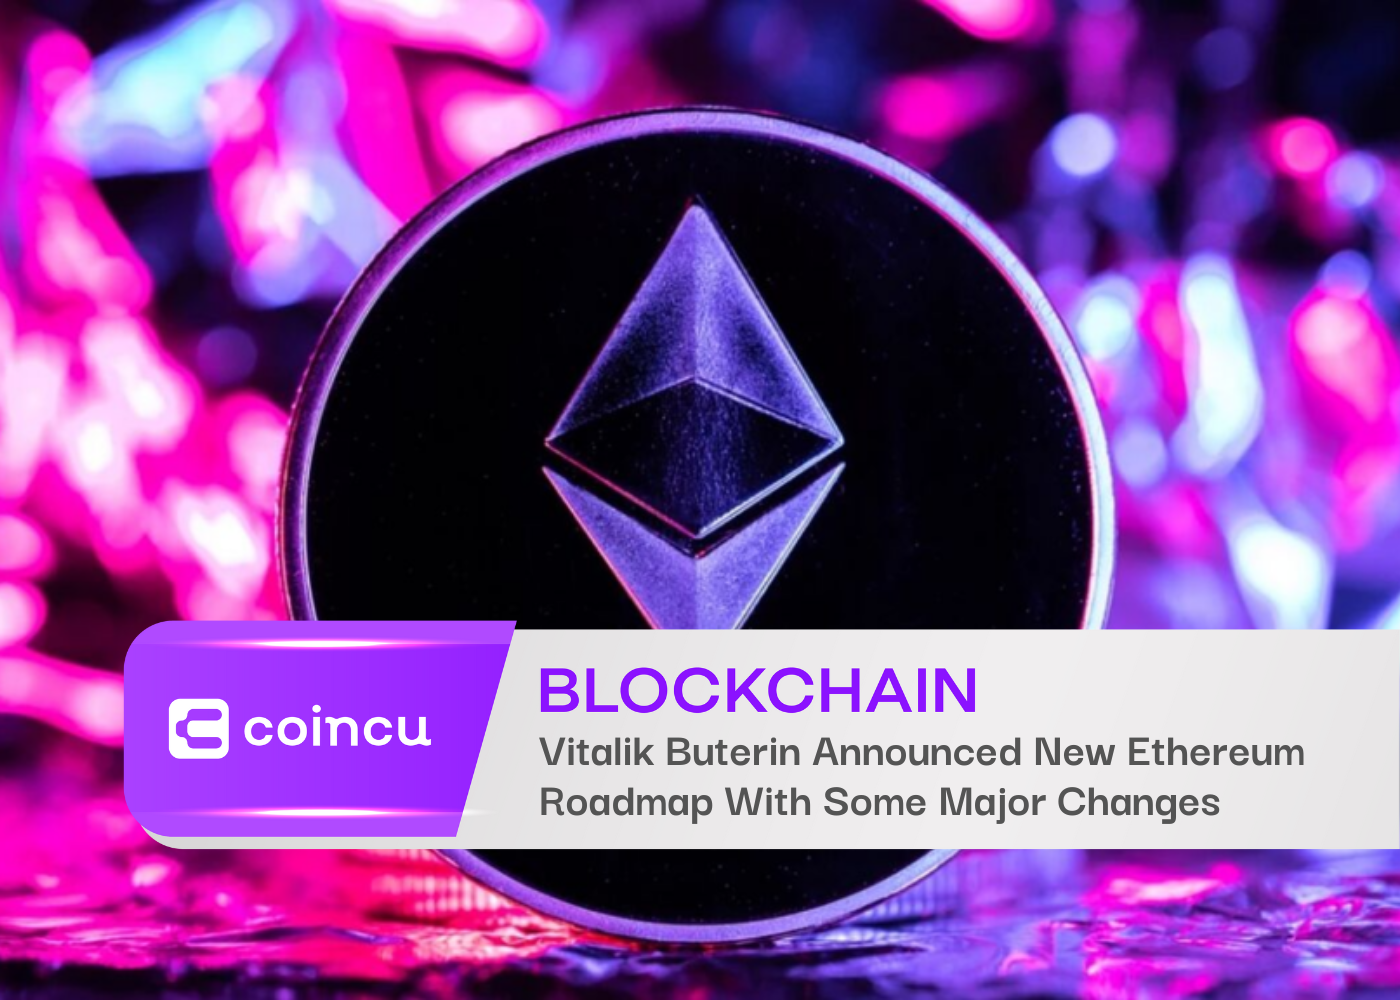 Vitalik Buterin Announced New Ethereum Roadmap With Some Major Changes